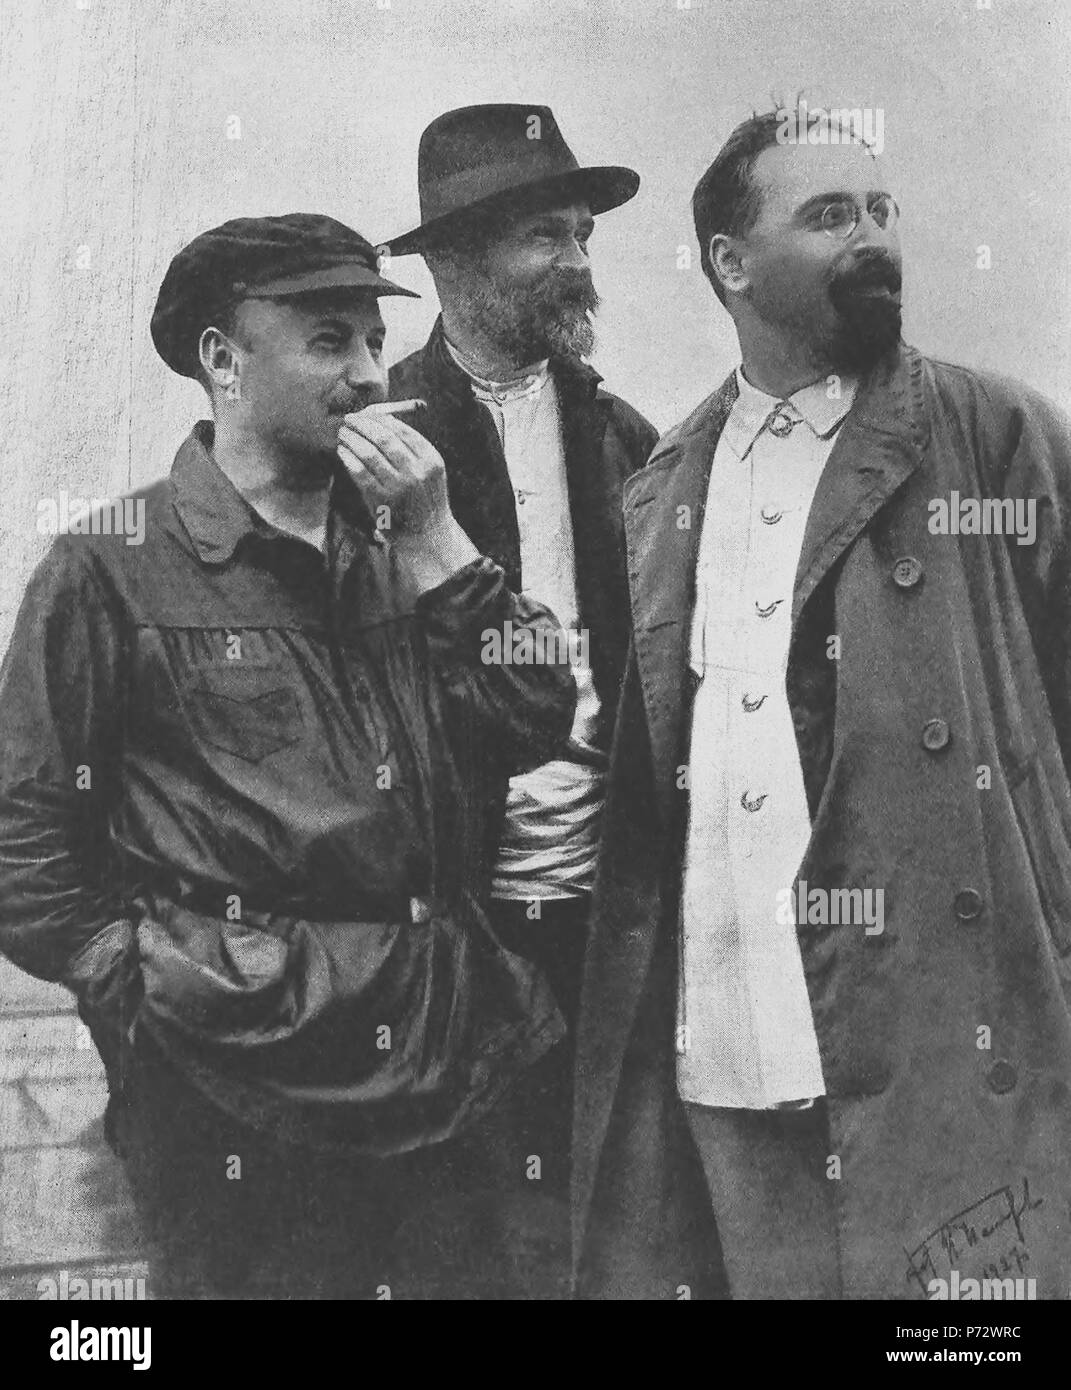 English: Old Bolsheviks: Nikolai Bukharin, the editor of Pravda and Projector. Ivan Skvortsov-Stepanov, the First People's Commissar (Minister) for Finance. Lev Karakhan, Deputy People's Commissar (Deputy Minister) for Foreign Affairs, the first Soviet Ambassador to China. Context: in one year after the photo’s publication, Joseph Stalin became de-facto dictator of the country. The lucky among three is Ivan Skvortsov-Stepanov since he had died from typhoid fever in Oct 1928 and buried in the Kremlin Wall Necropolis. Nikolai Bukharin confessed as “the enemy of the people” during Trial of Twenty Stock Photo